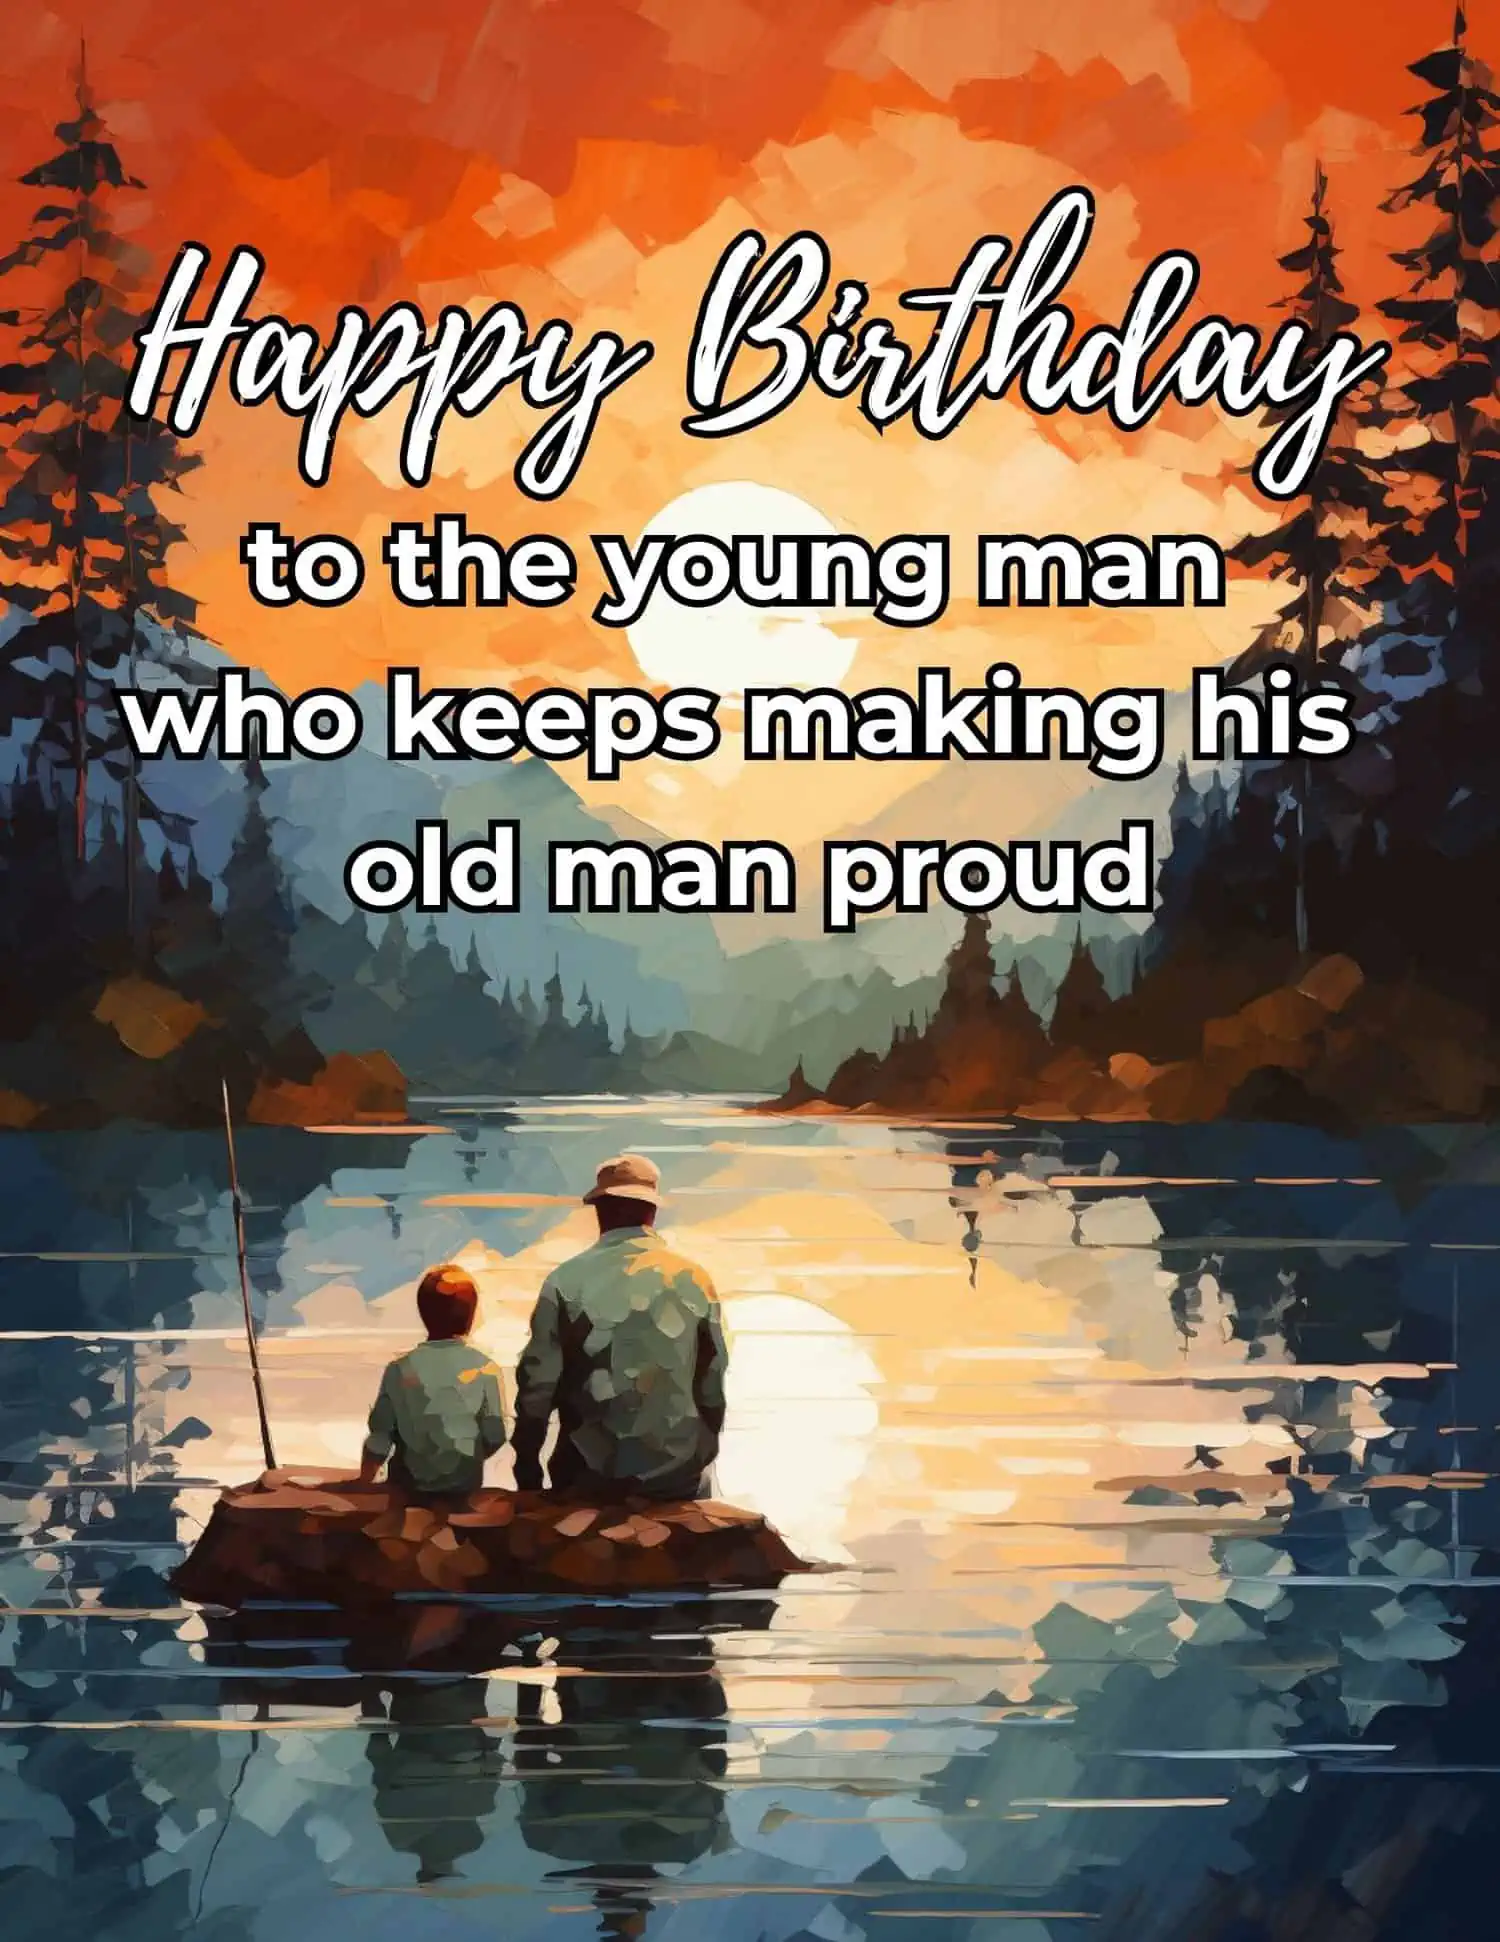 A selection of birthday wishes that encapsulate the unique bond between a father and his son.